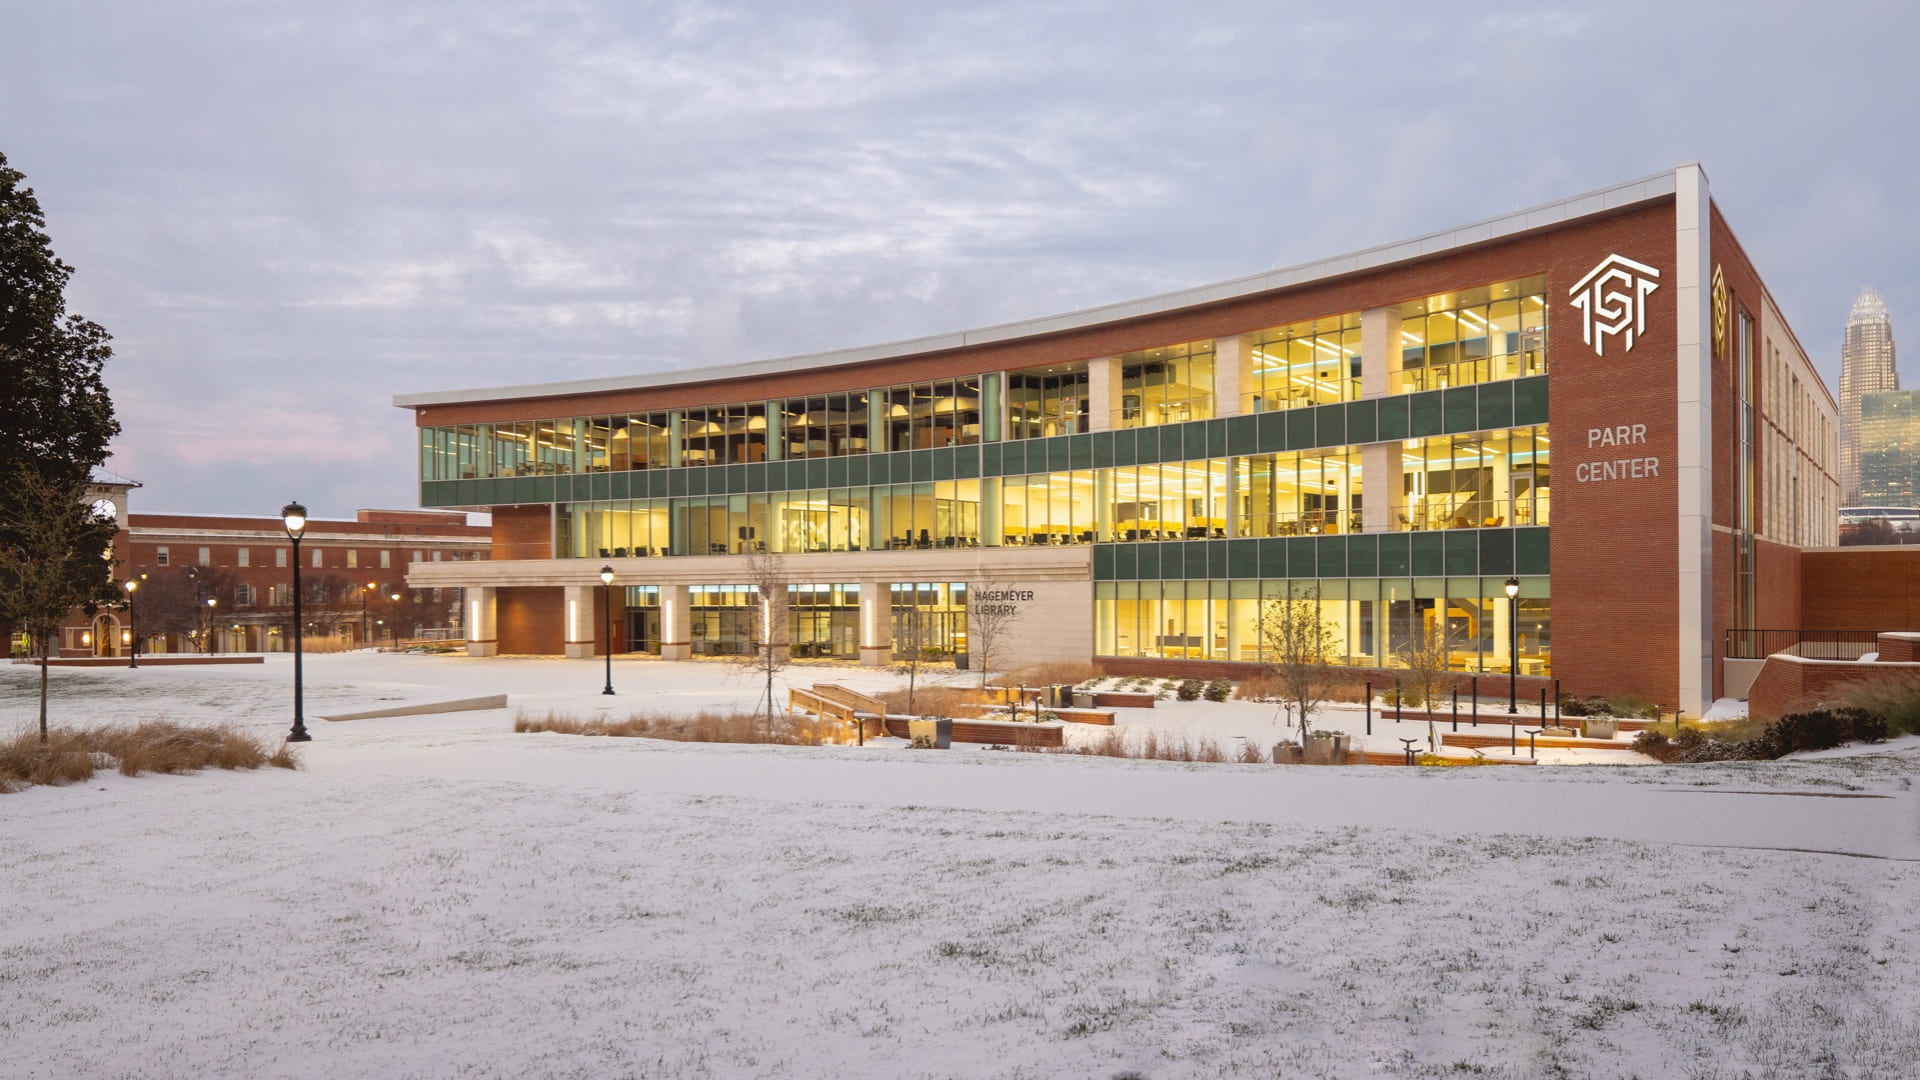 Parr Center in the Winter